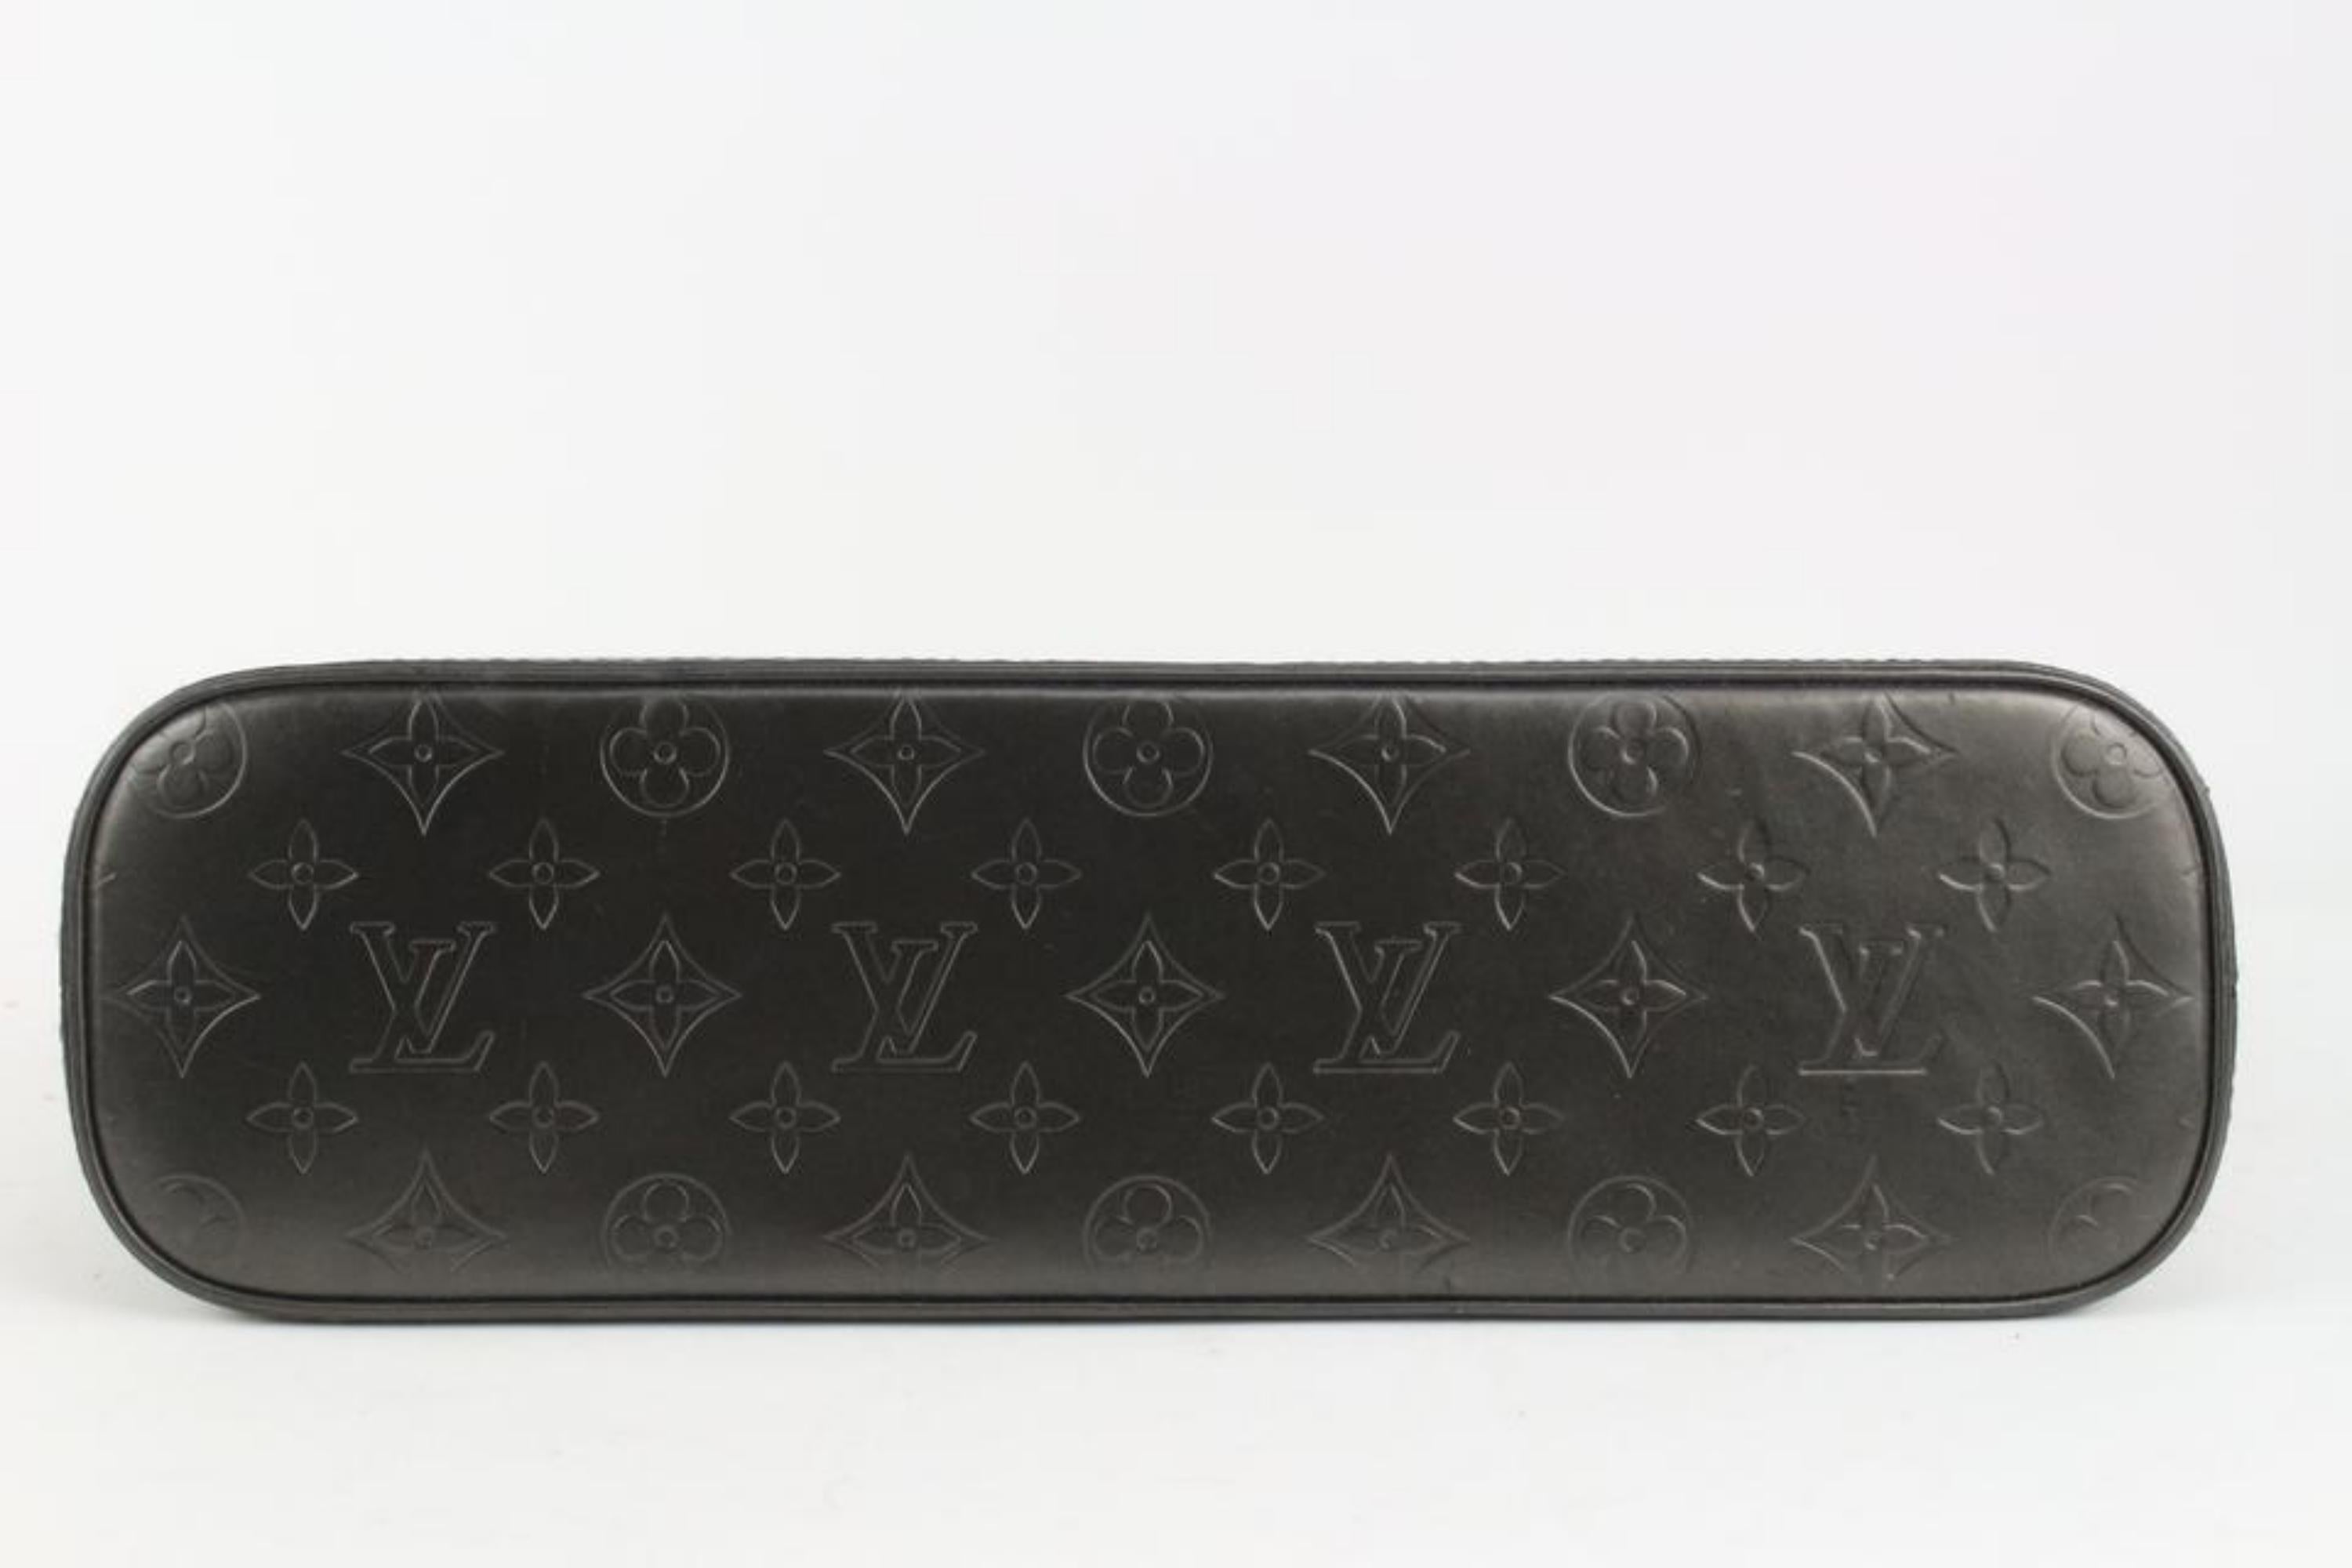 Louis Vuitton Dark Grey Monogram Vernis Mat Wilwood Tote Bag 3LV1018 In Fair Condition For Sale In Dix hills, NY